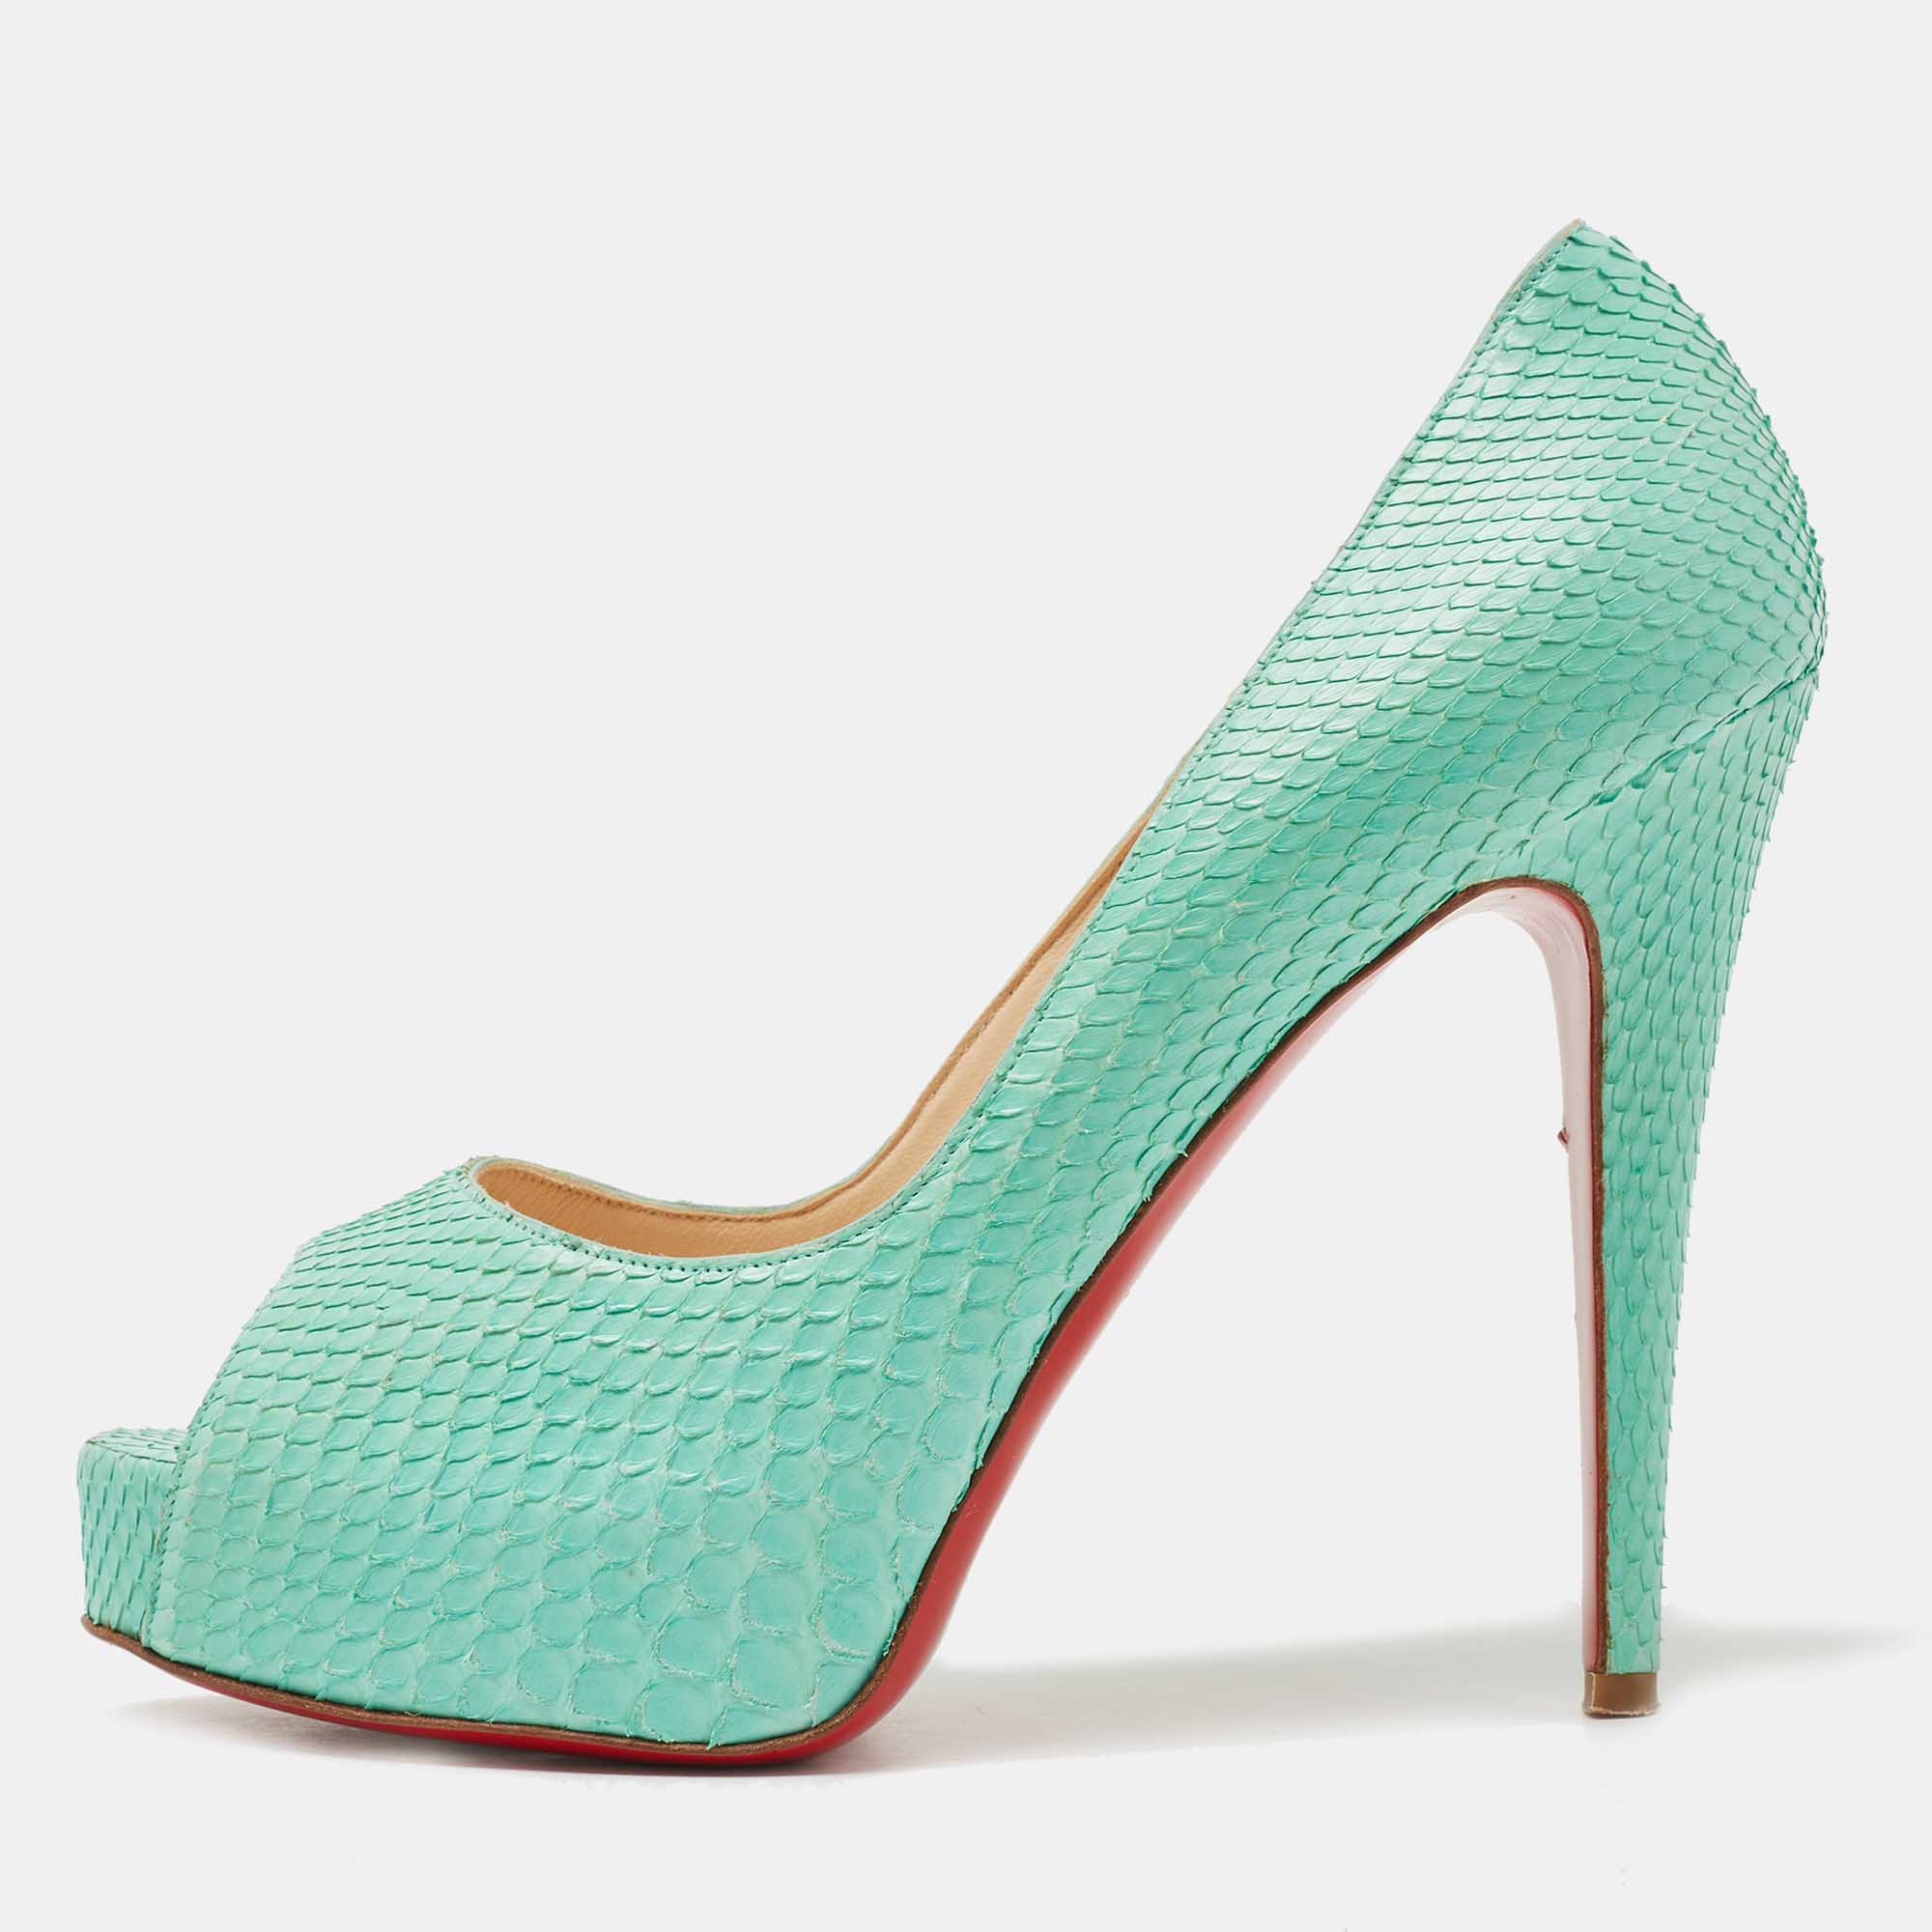 Christian louboutin turquoise python very prive pumps size 38.5